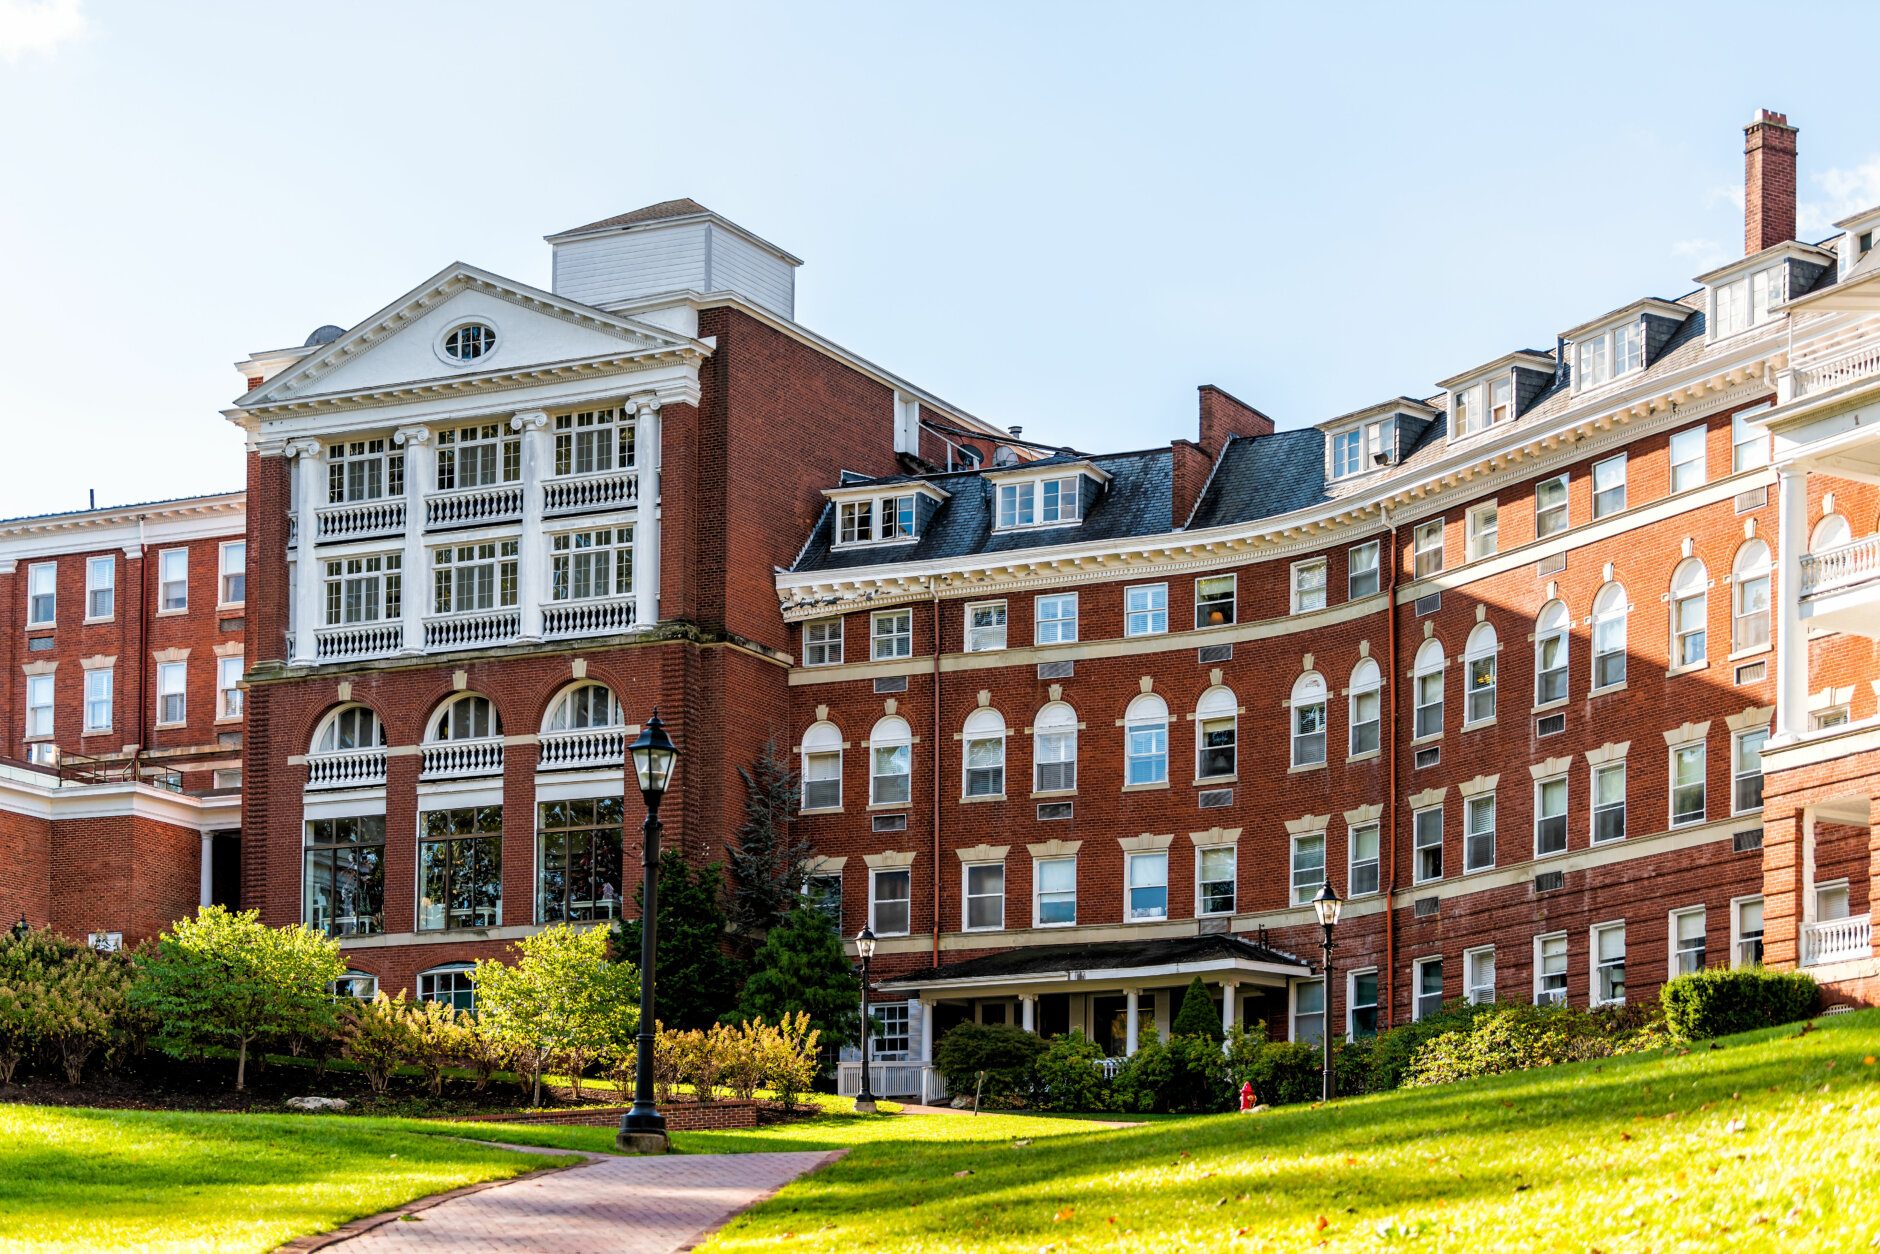 Hot Springs, USA - October 18, 2019: Historic Omni Homestead brick architecture hotel in downtown town village city in Virginia countryside